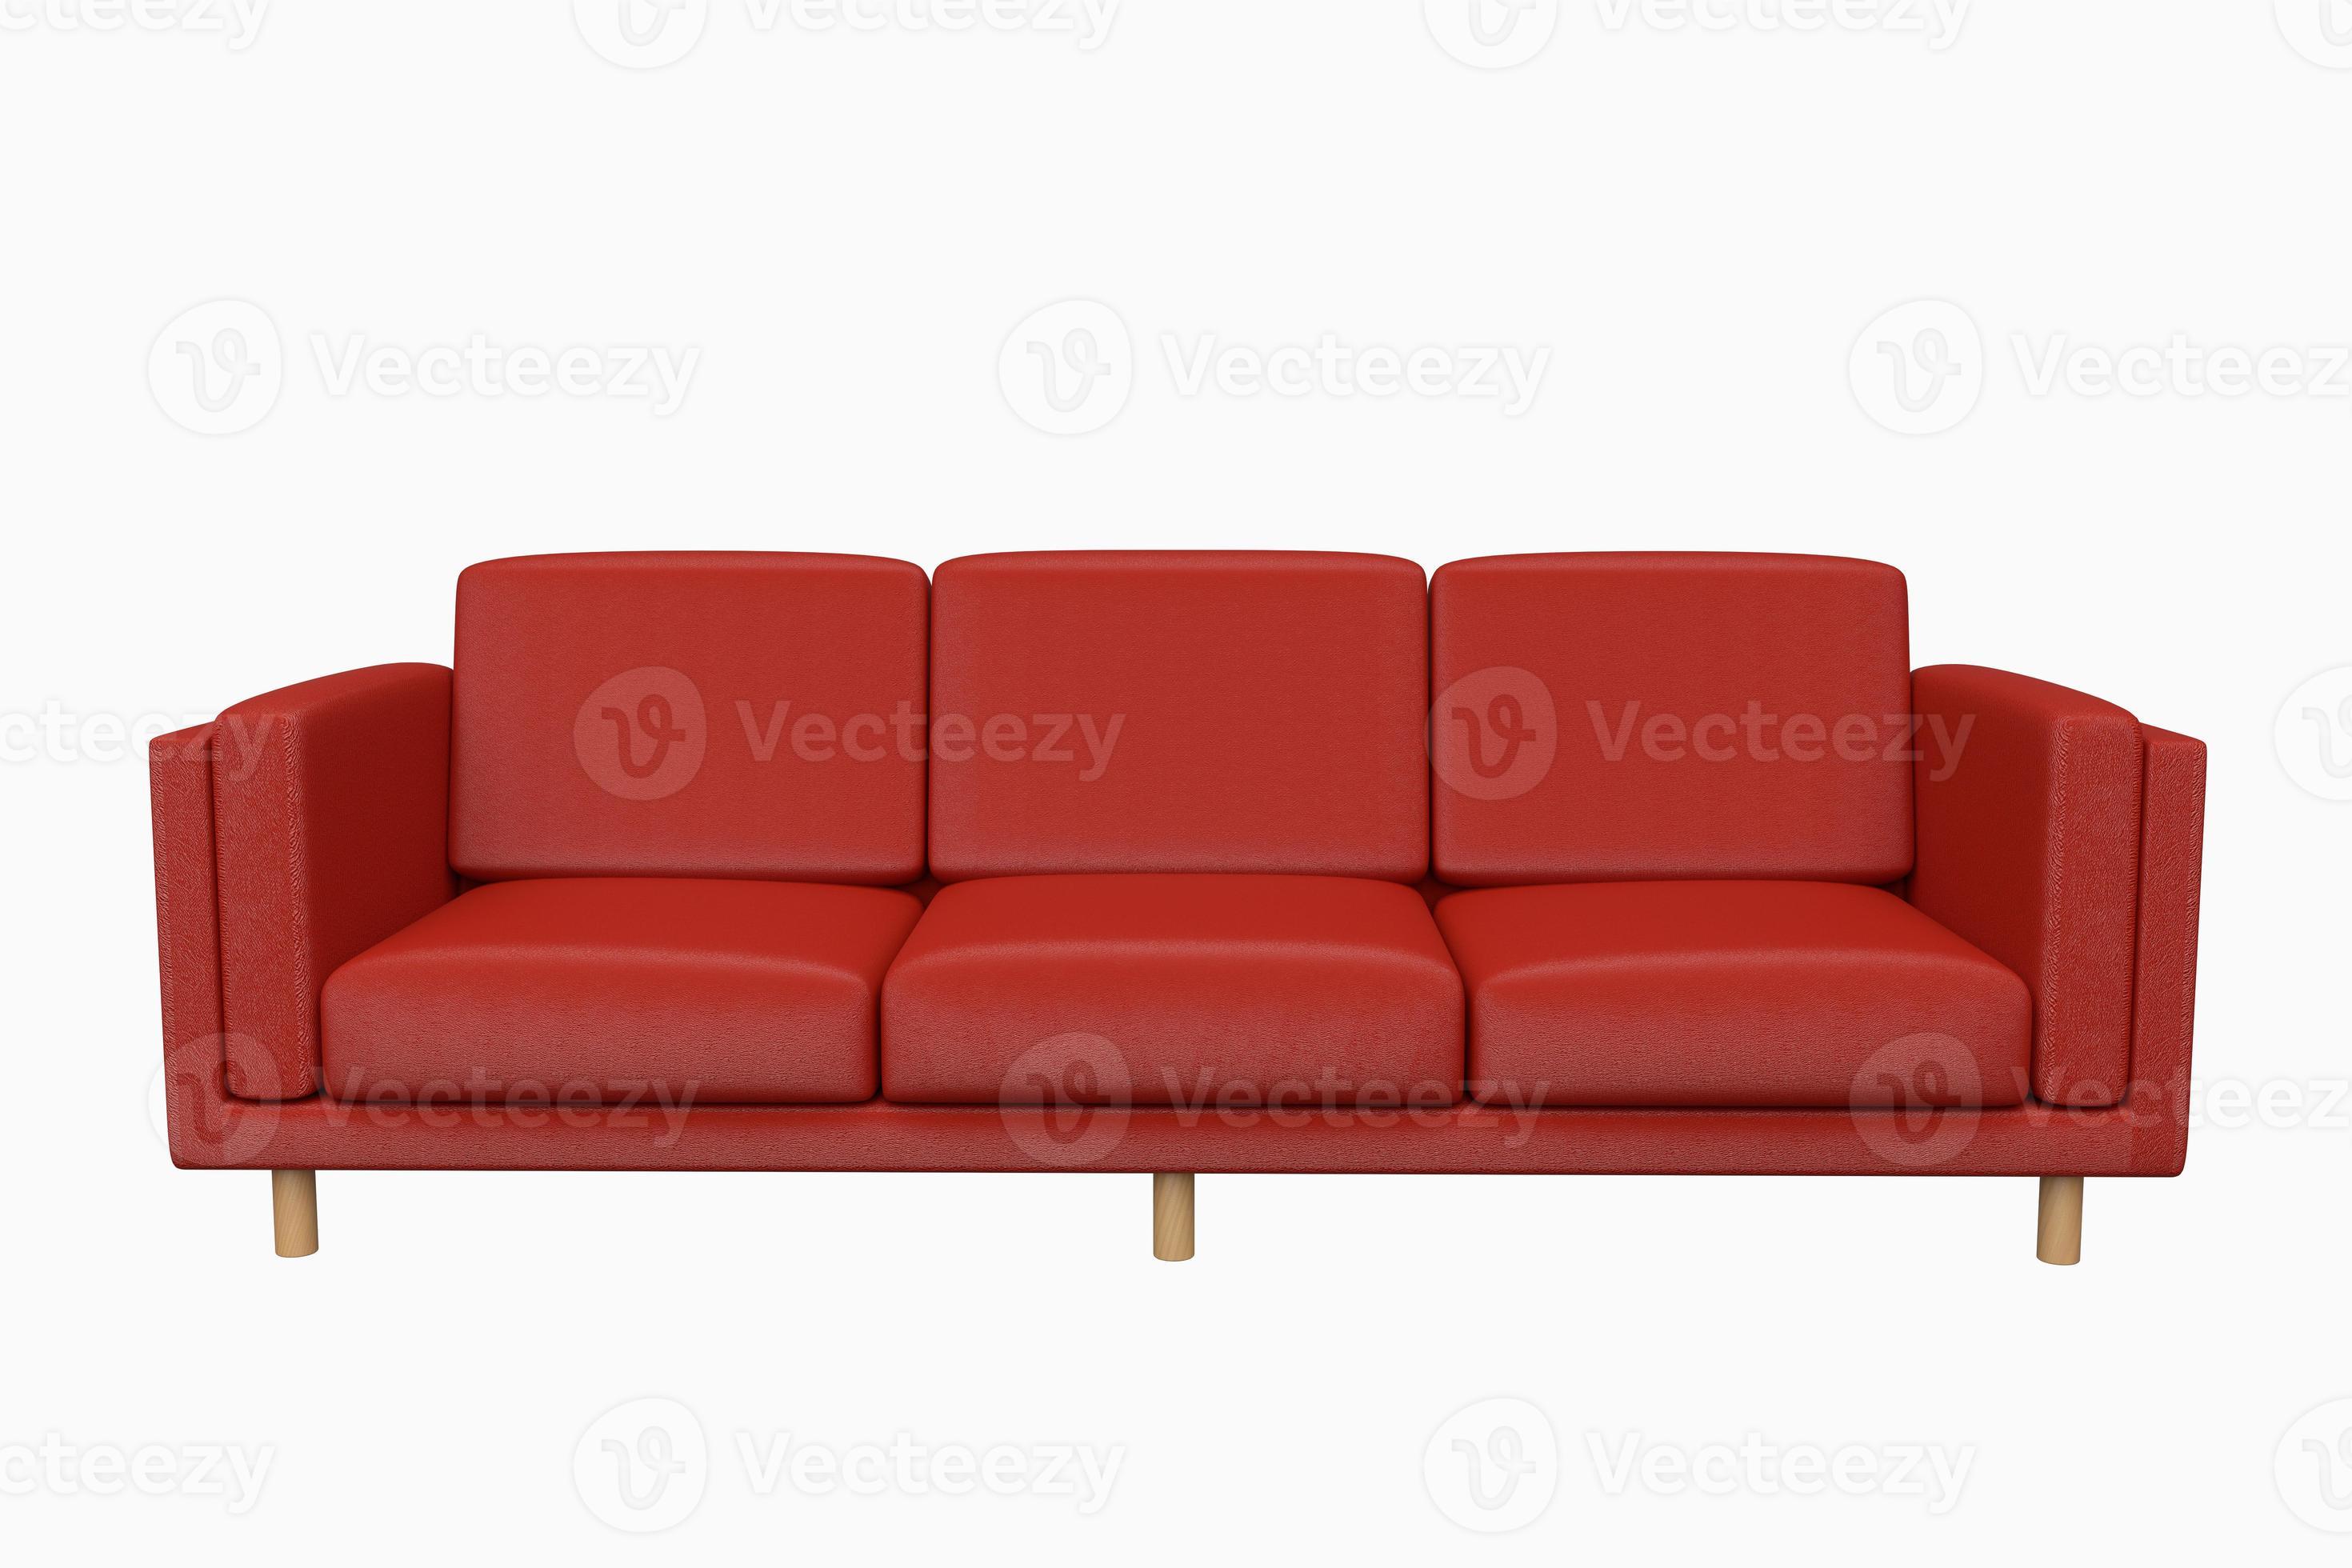 Sofa leather in white background for use in graphics, photo editing, sofas,  various colors, red, black, green and other colors. White background is  easy to edit for interior illustration 6781529 Stock Photo